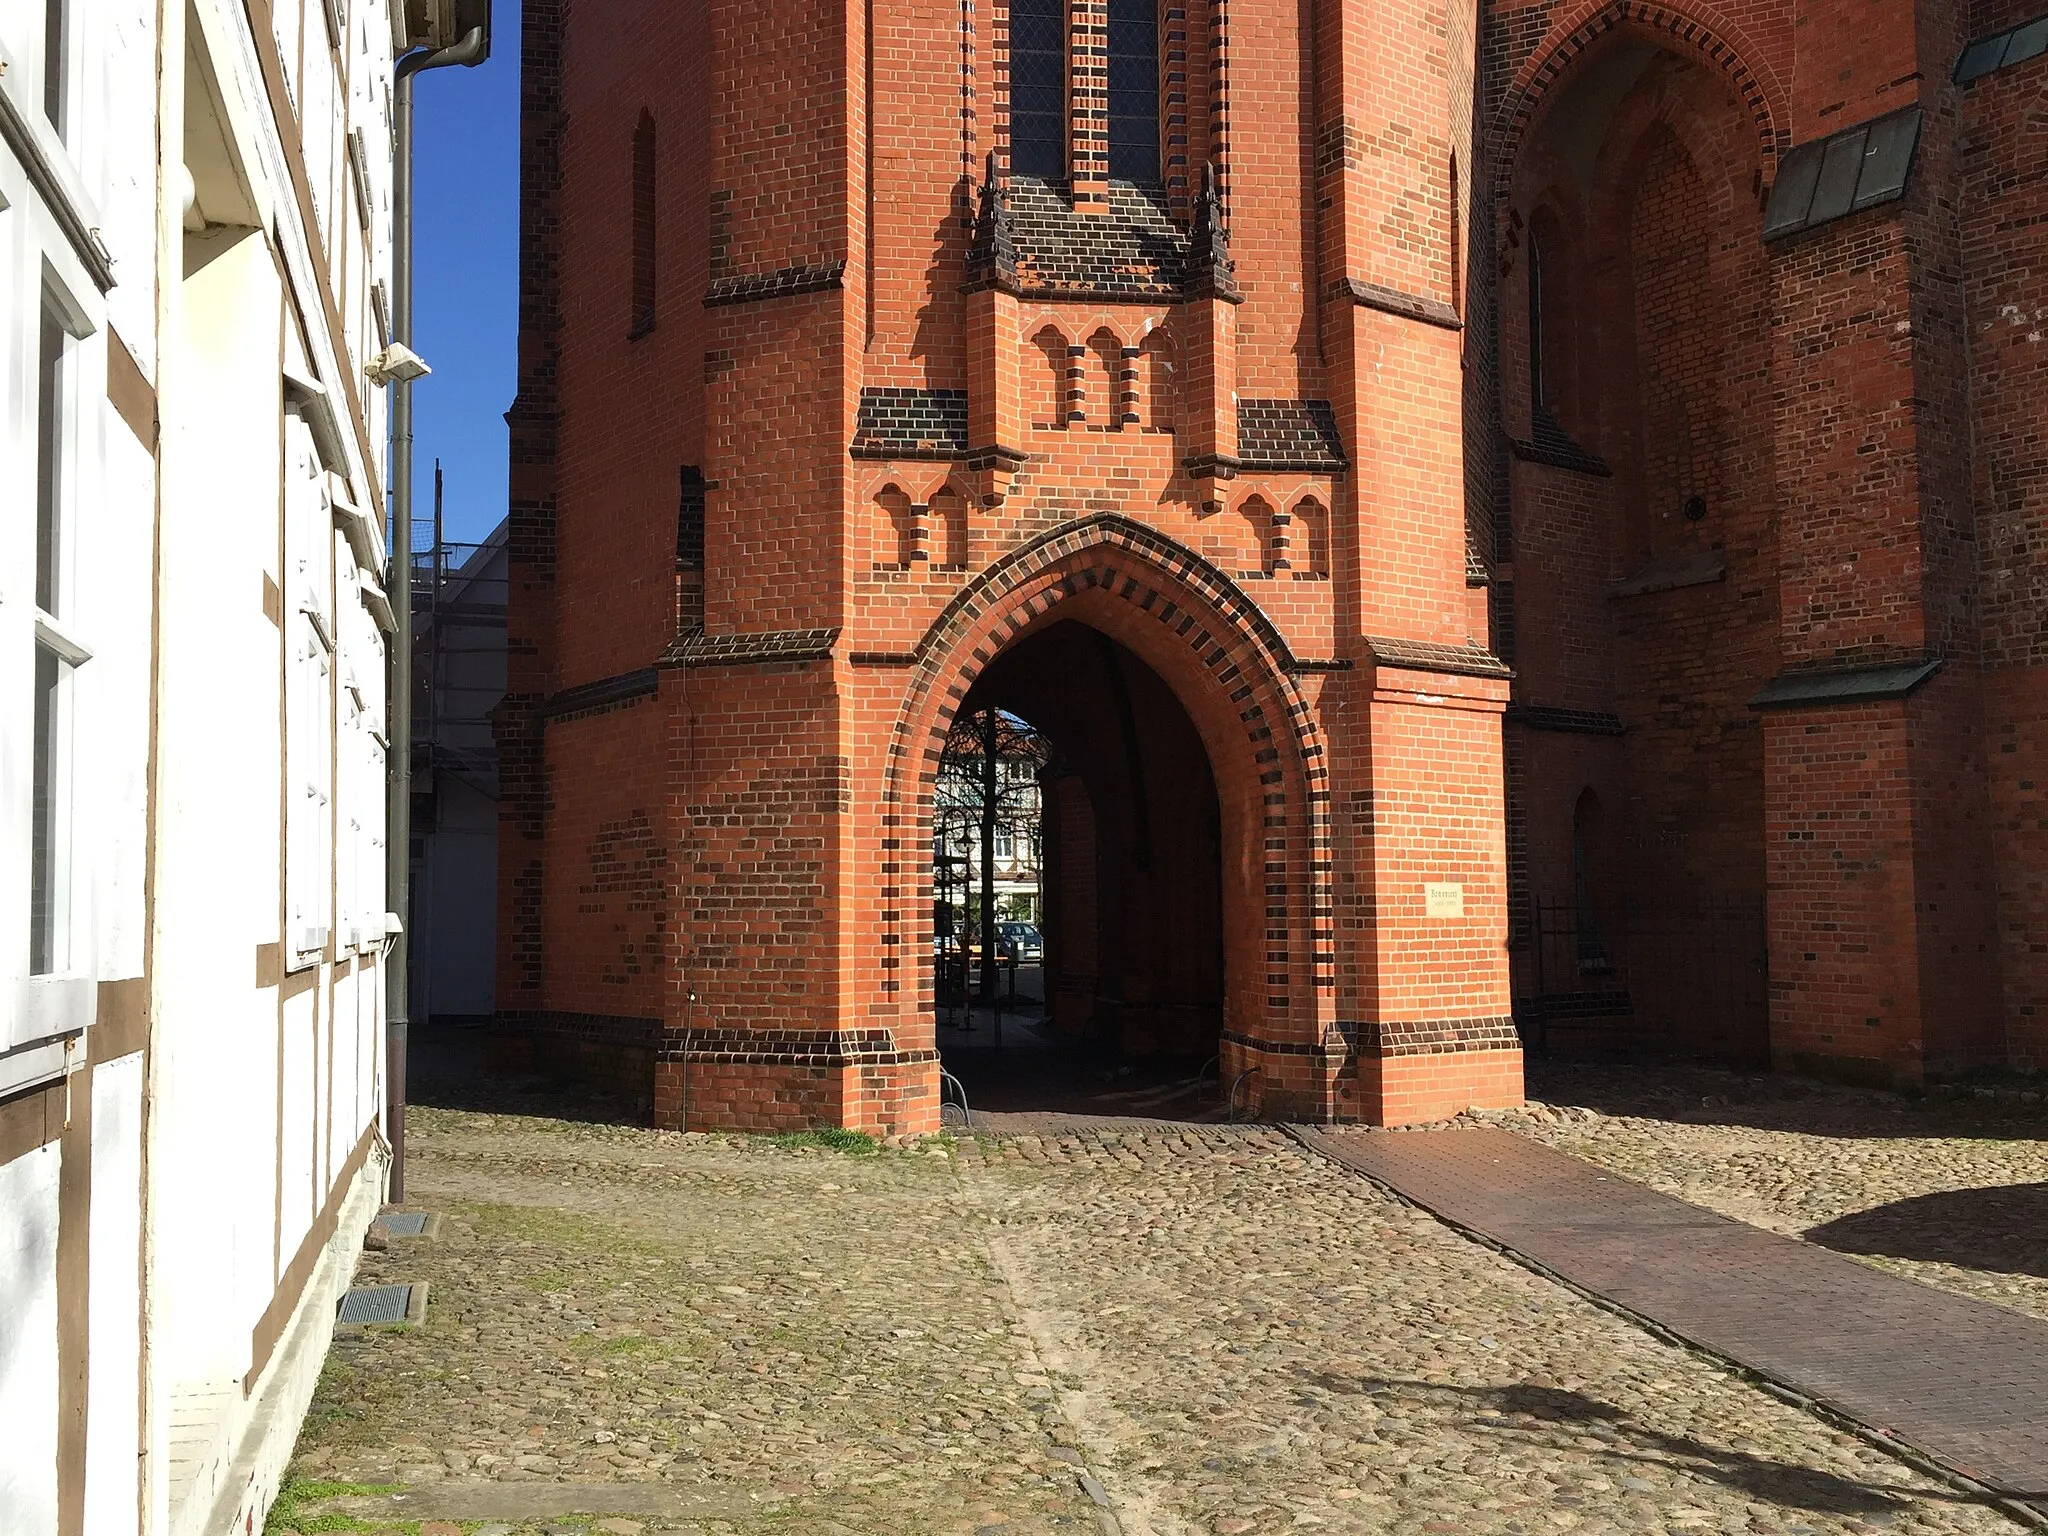 Photo showing: The tower passage of the St Marien church on Kirchstrasse in Winsen (Luhe) on March 23, 2020